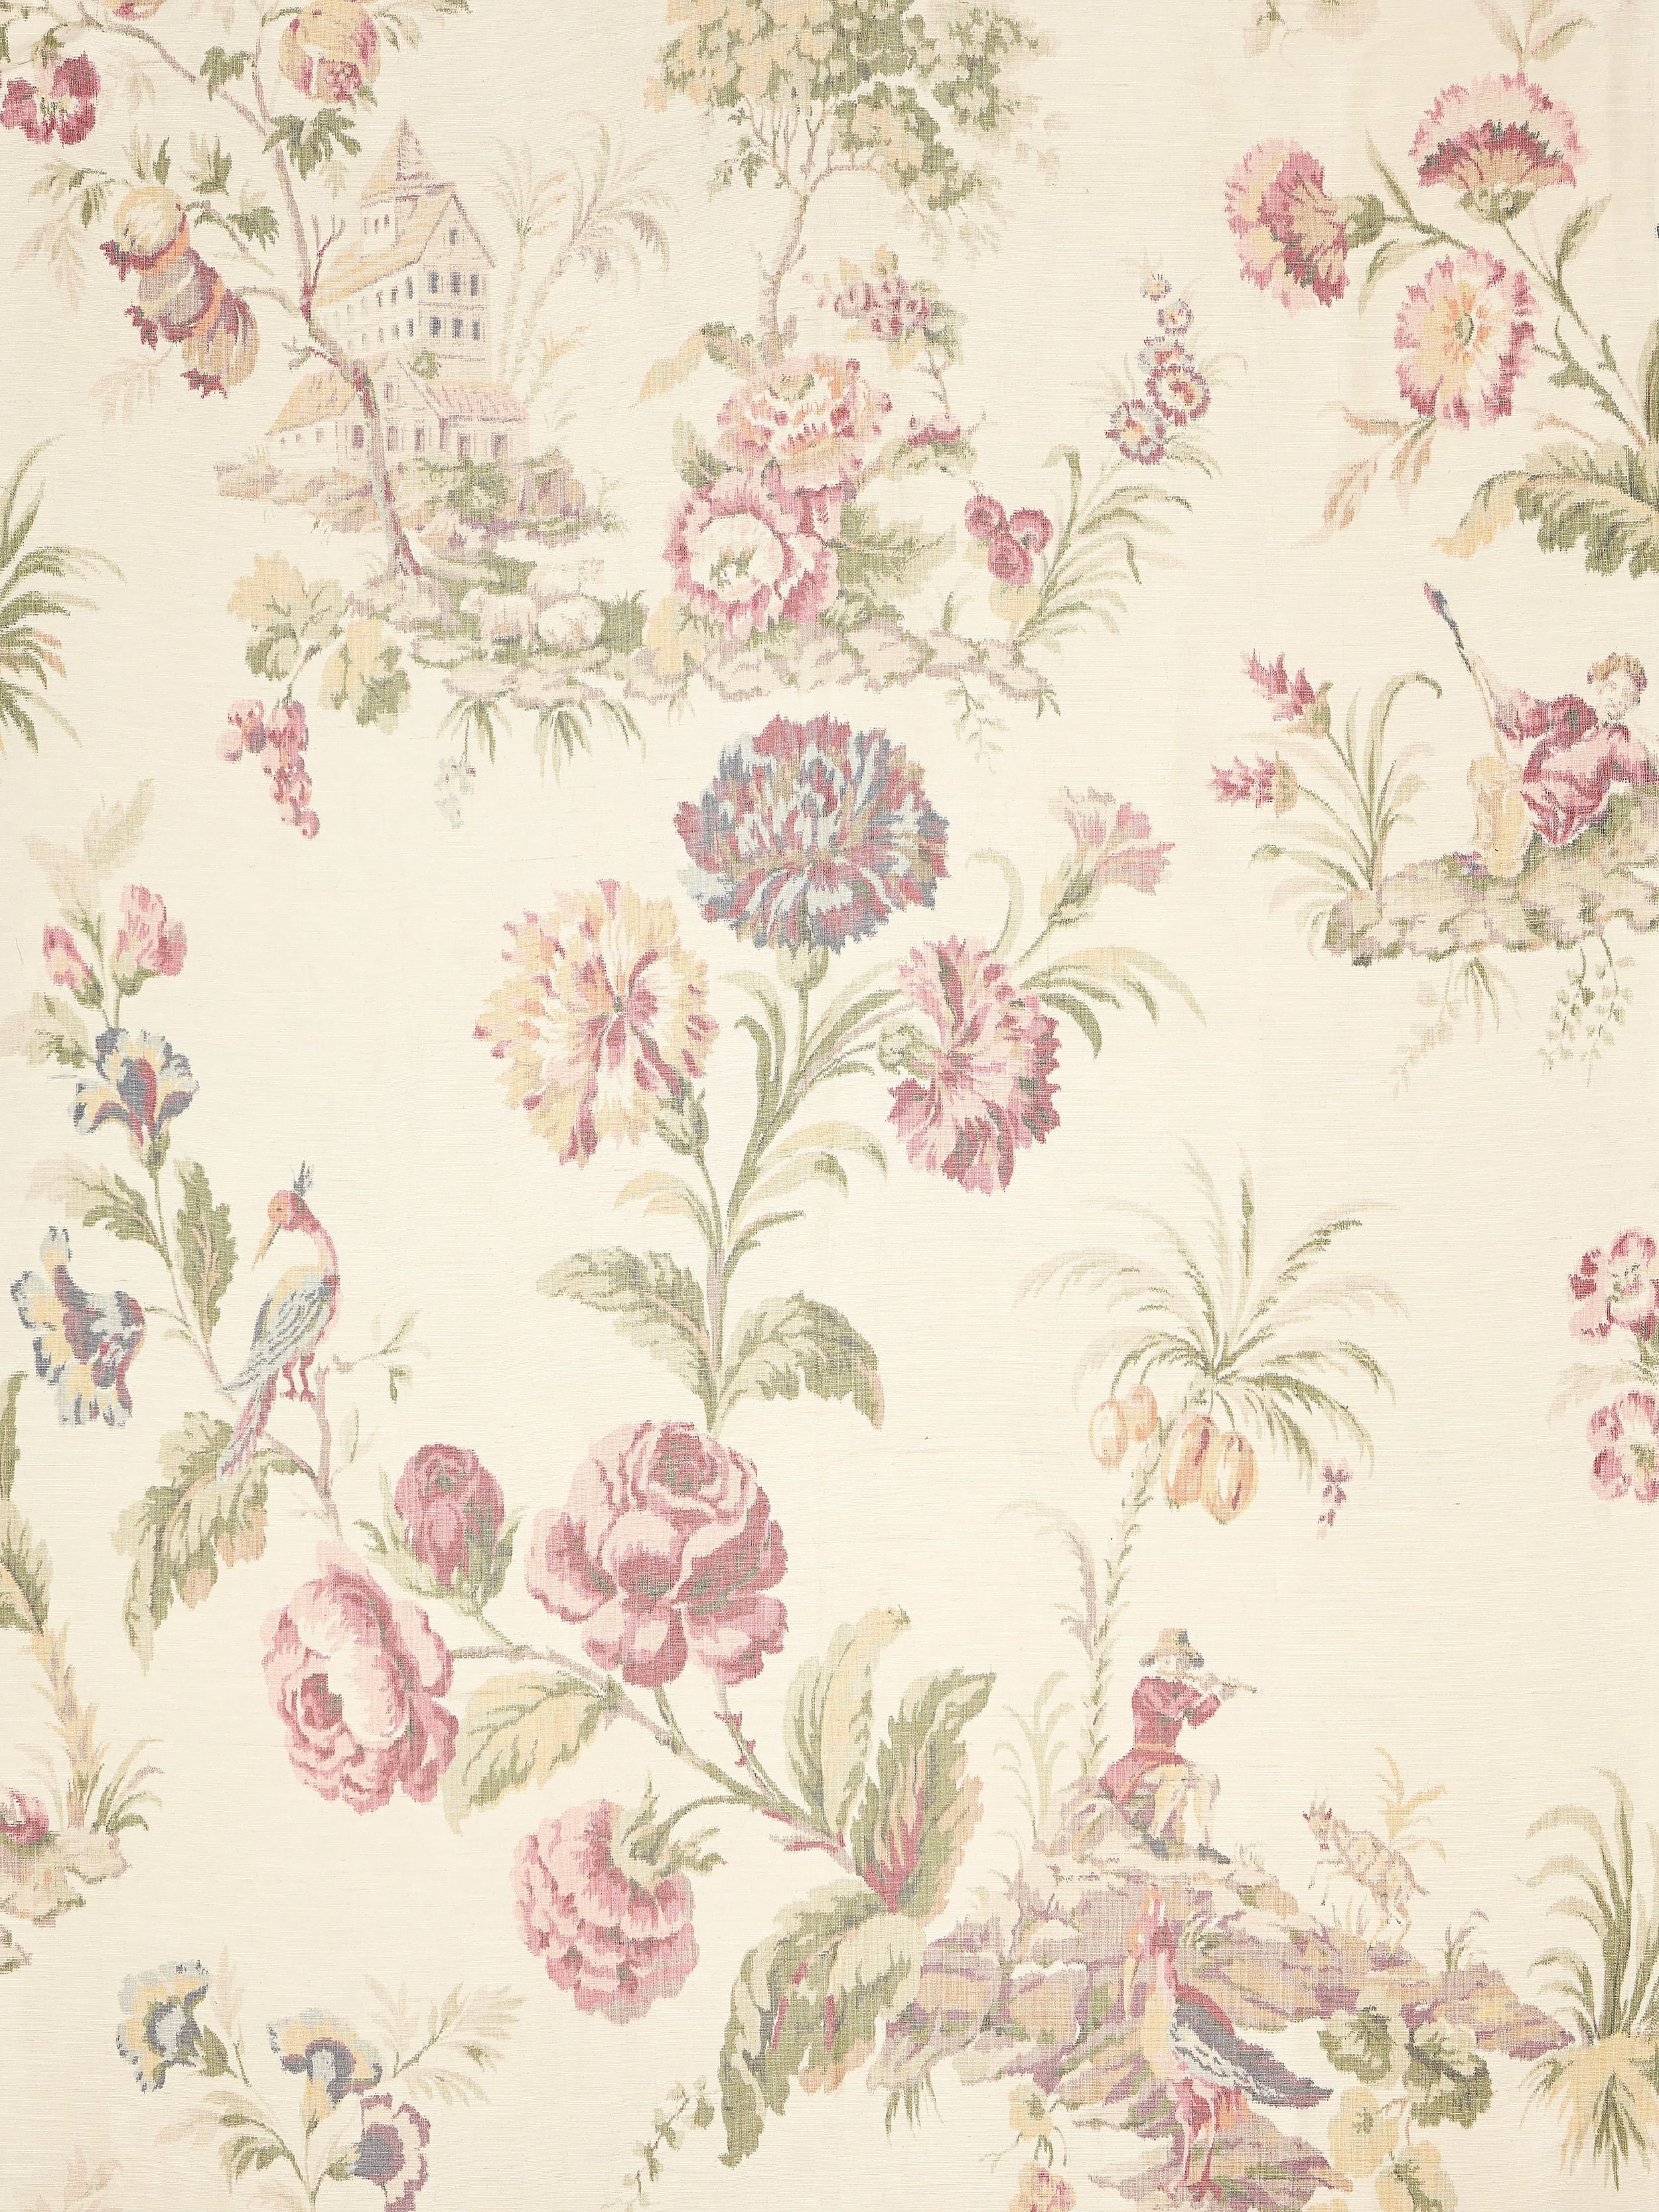 Somerset Silk Warp Print fabric in bloom color - pattern number SC 000116585 - by Scalamandre in the Scalamandre Fabrics Book 1 collection